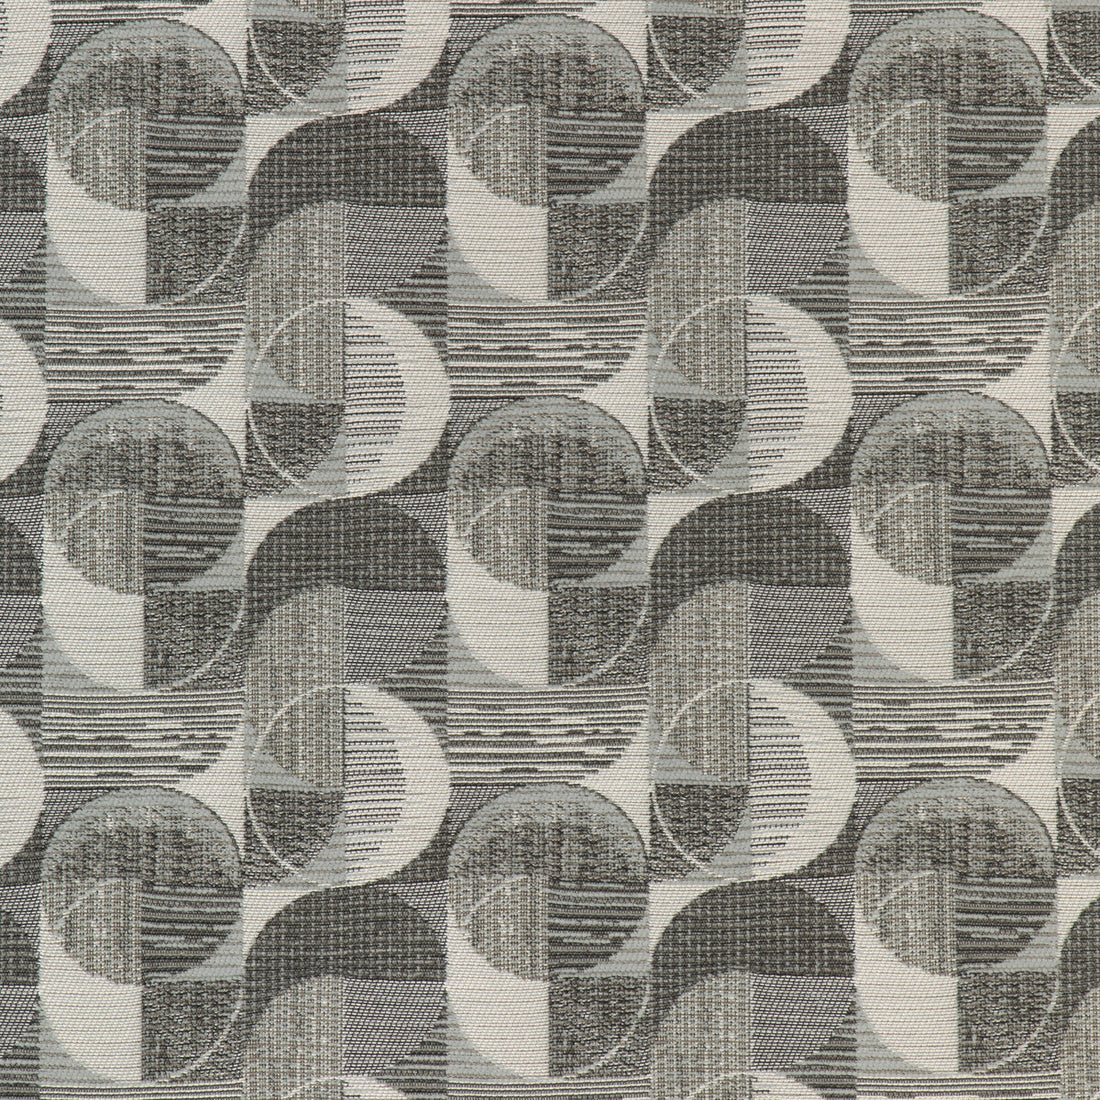 Daybreak fabric in moonlight color - pattern 37050.11.0 - by Kravet Contract in the Chesapeake collection